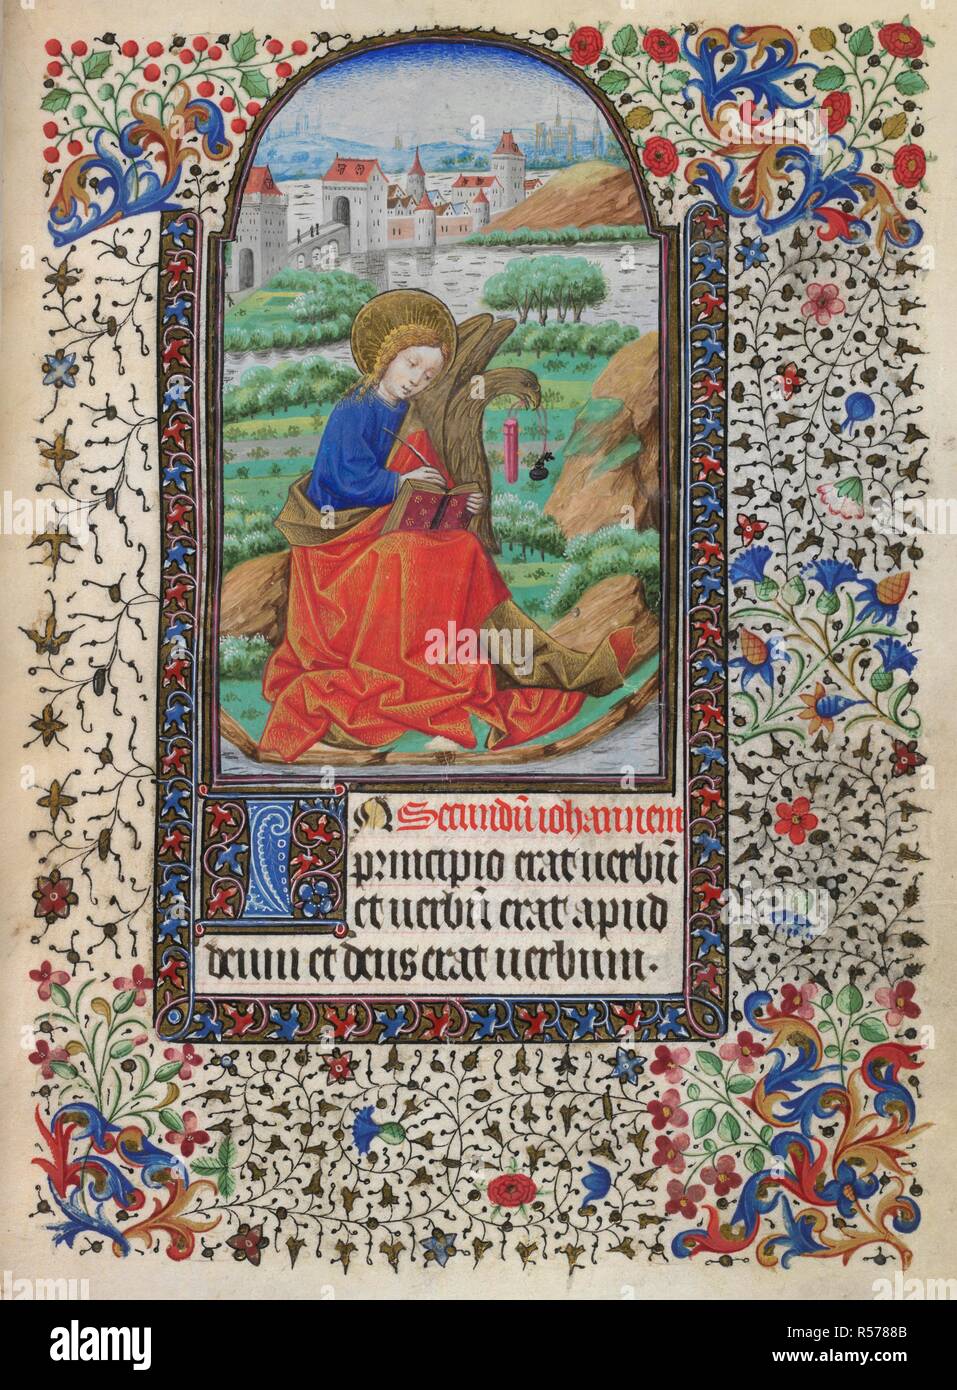 St John writing his gospel. Book of Hours. France; 15th century. [Whole folio] Gospel readings. St John seated writing his gospel, in a landscape with river and walled town in the distance. Beside him the eagle holds a cord in its beak, to which is attached a pen box and an inkpot. Beginning of St John's gospel, with decorated initial 'I'. Borders of foliate decoration  Image taken from Book of Hours.  Originally published/produced in France; 15th century. . Source: Harley 2971, f.13. Language: Latin. Stock Photo